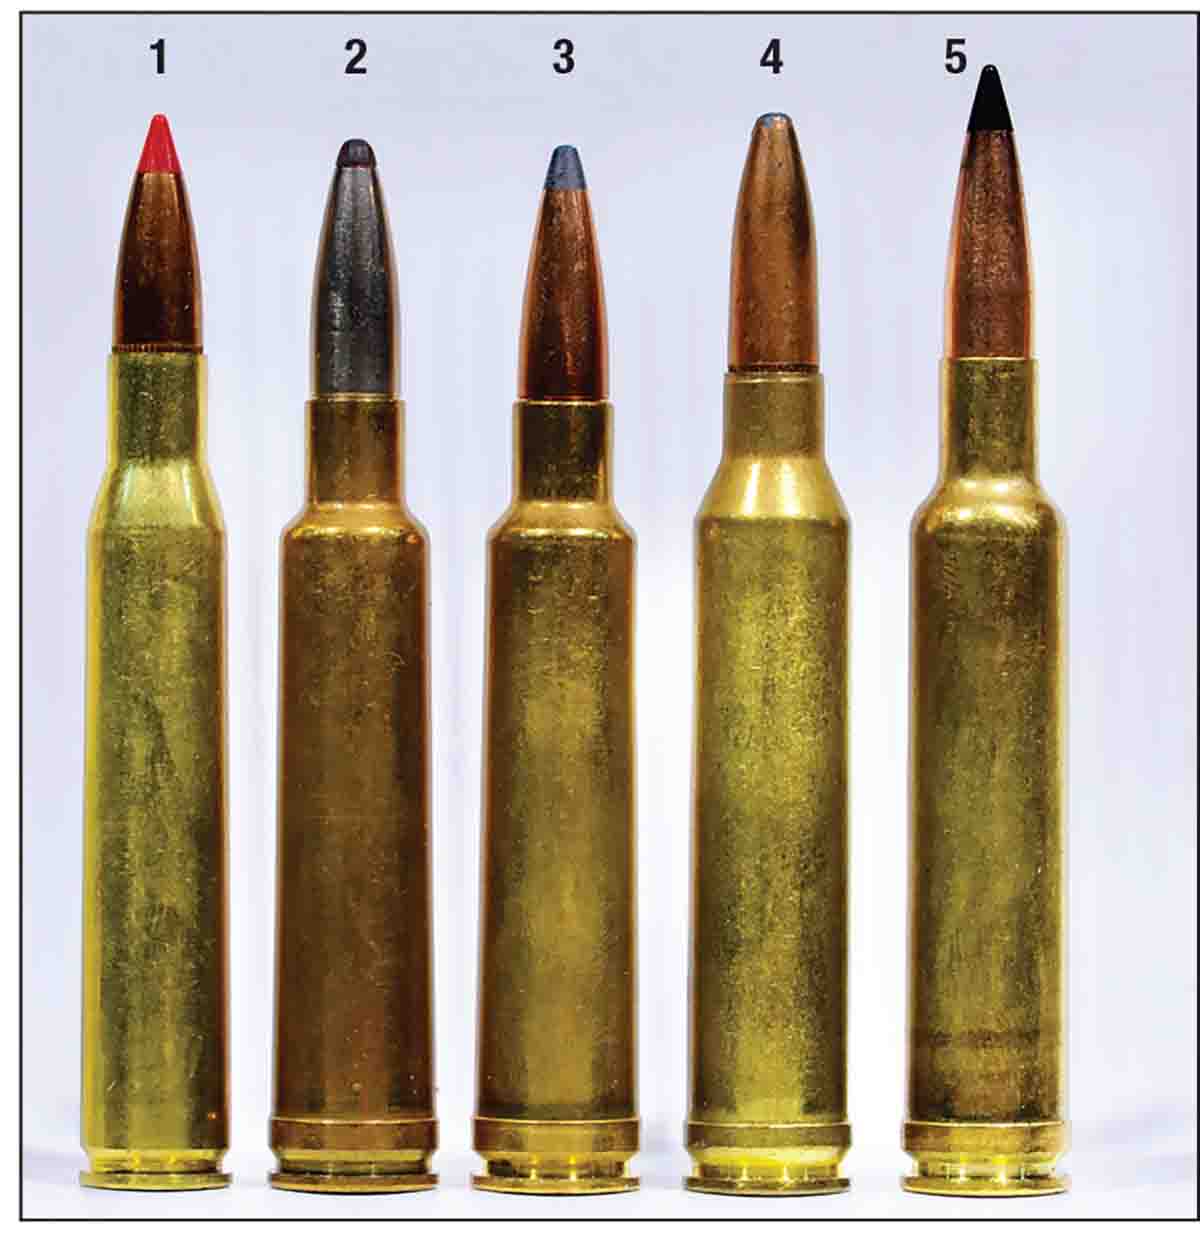 The 7x61 and its rivals: (1) 280 Remington, (2) 7x61 S&H, (3) Super 7x61, (4) 7mm Remington Magnum and (5) 7mm Weatherby.